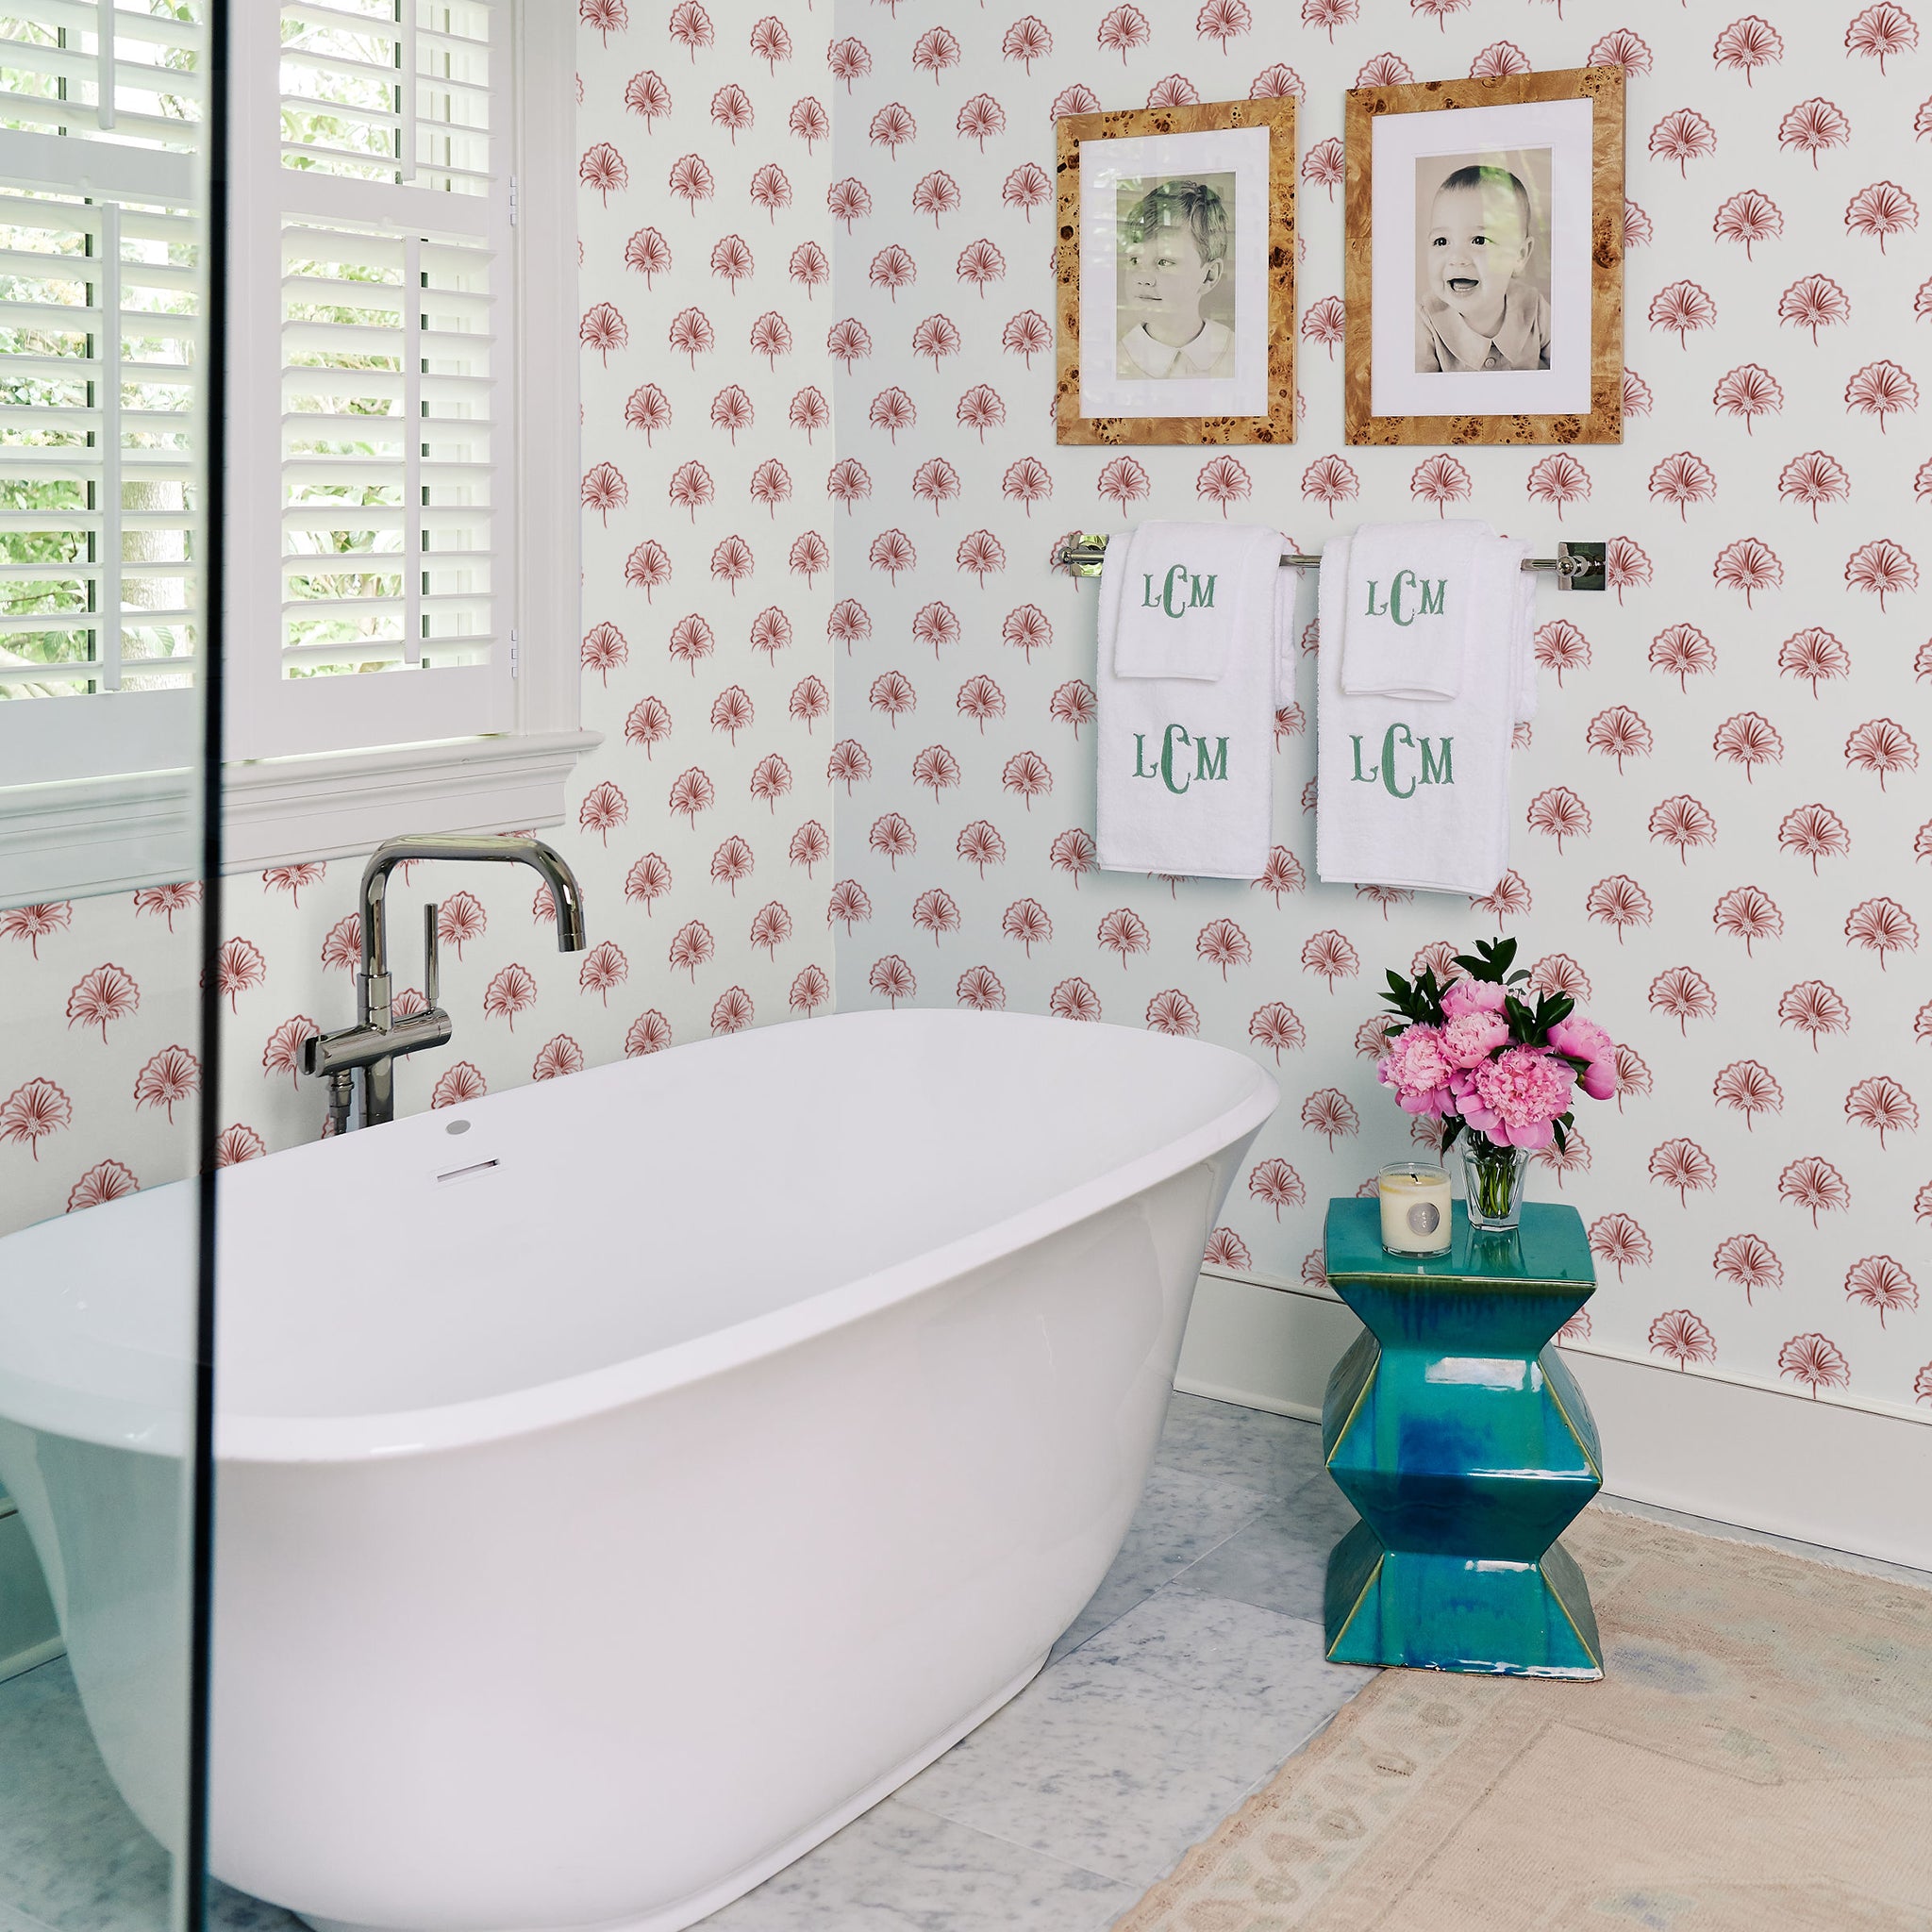 Bathroom styled with Rose Floral printed wallpaper with white bath tub and two photo frames hanging from wall on top of the hanging monogrammed towels